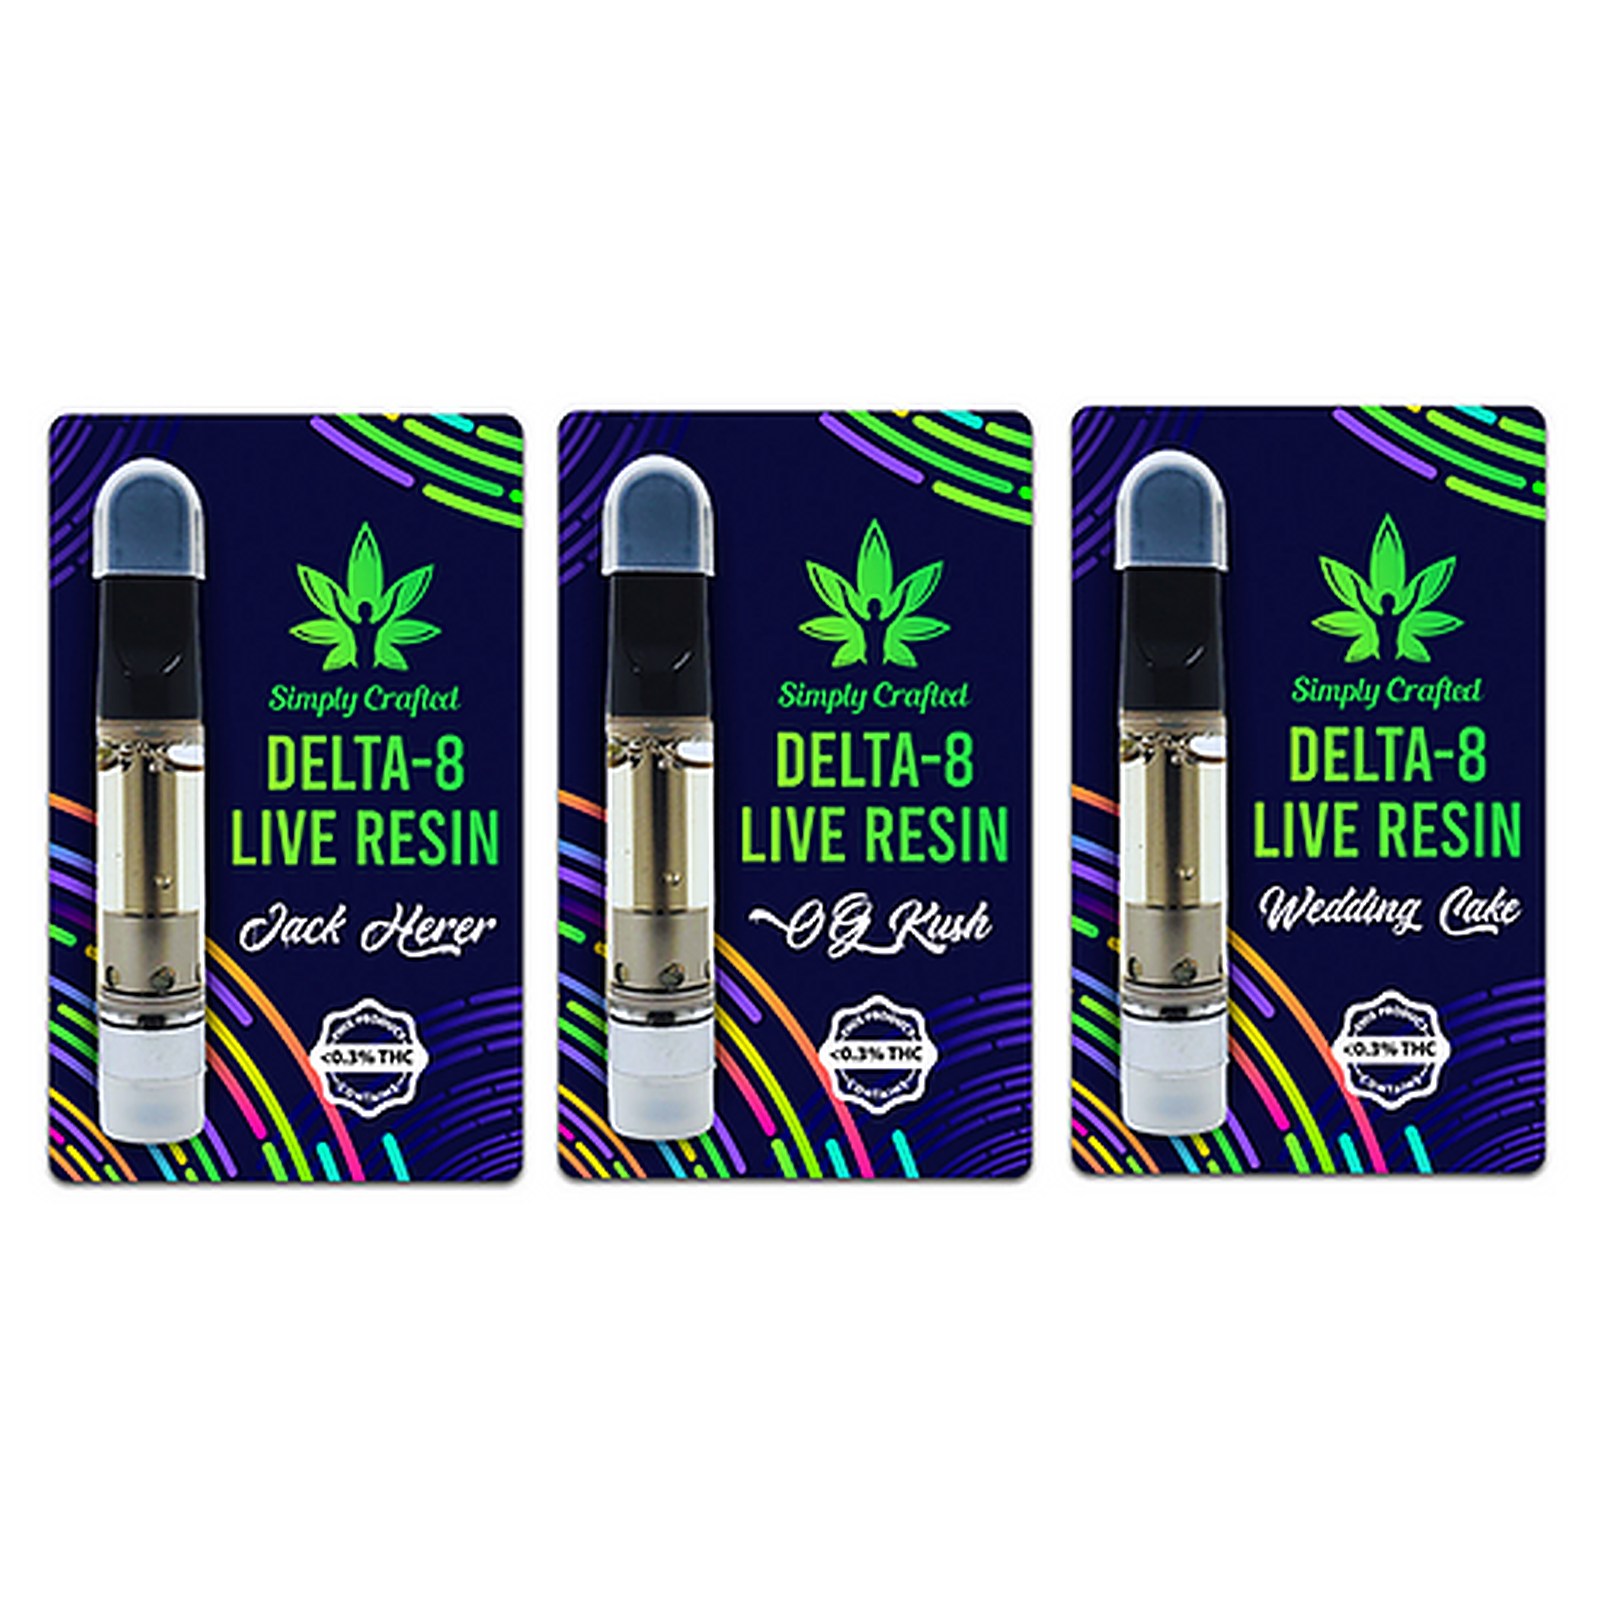 Simply Crafted Save 25 With Code Leafly Delta 8 Thc Vape Carts Sativa Hybrid And Indica 1952